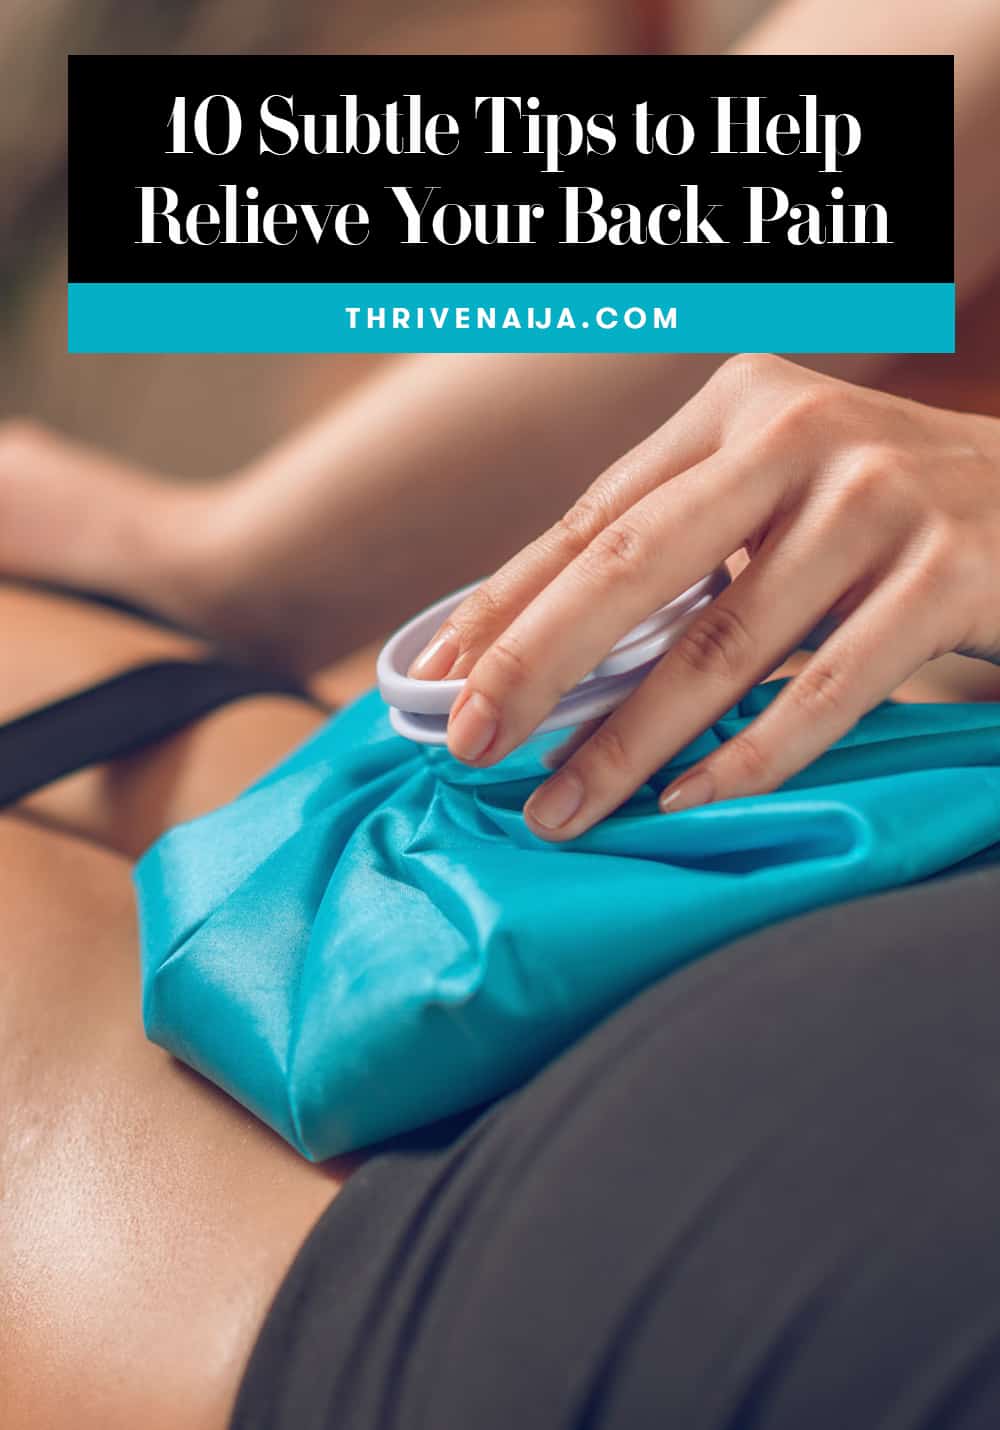 10 Subtle Tips to Help Relieve Your Back Pain